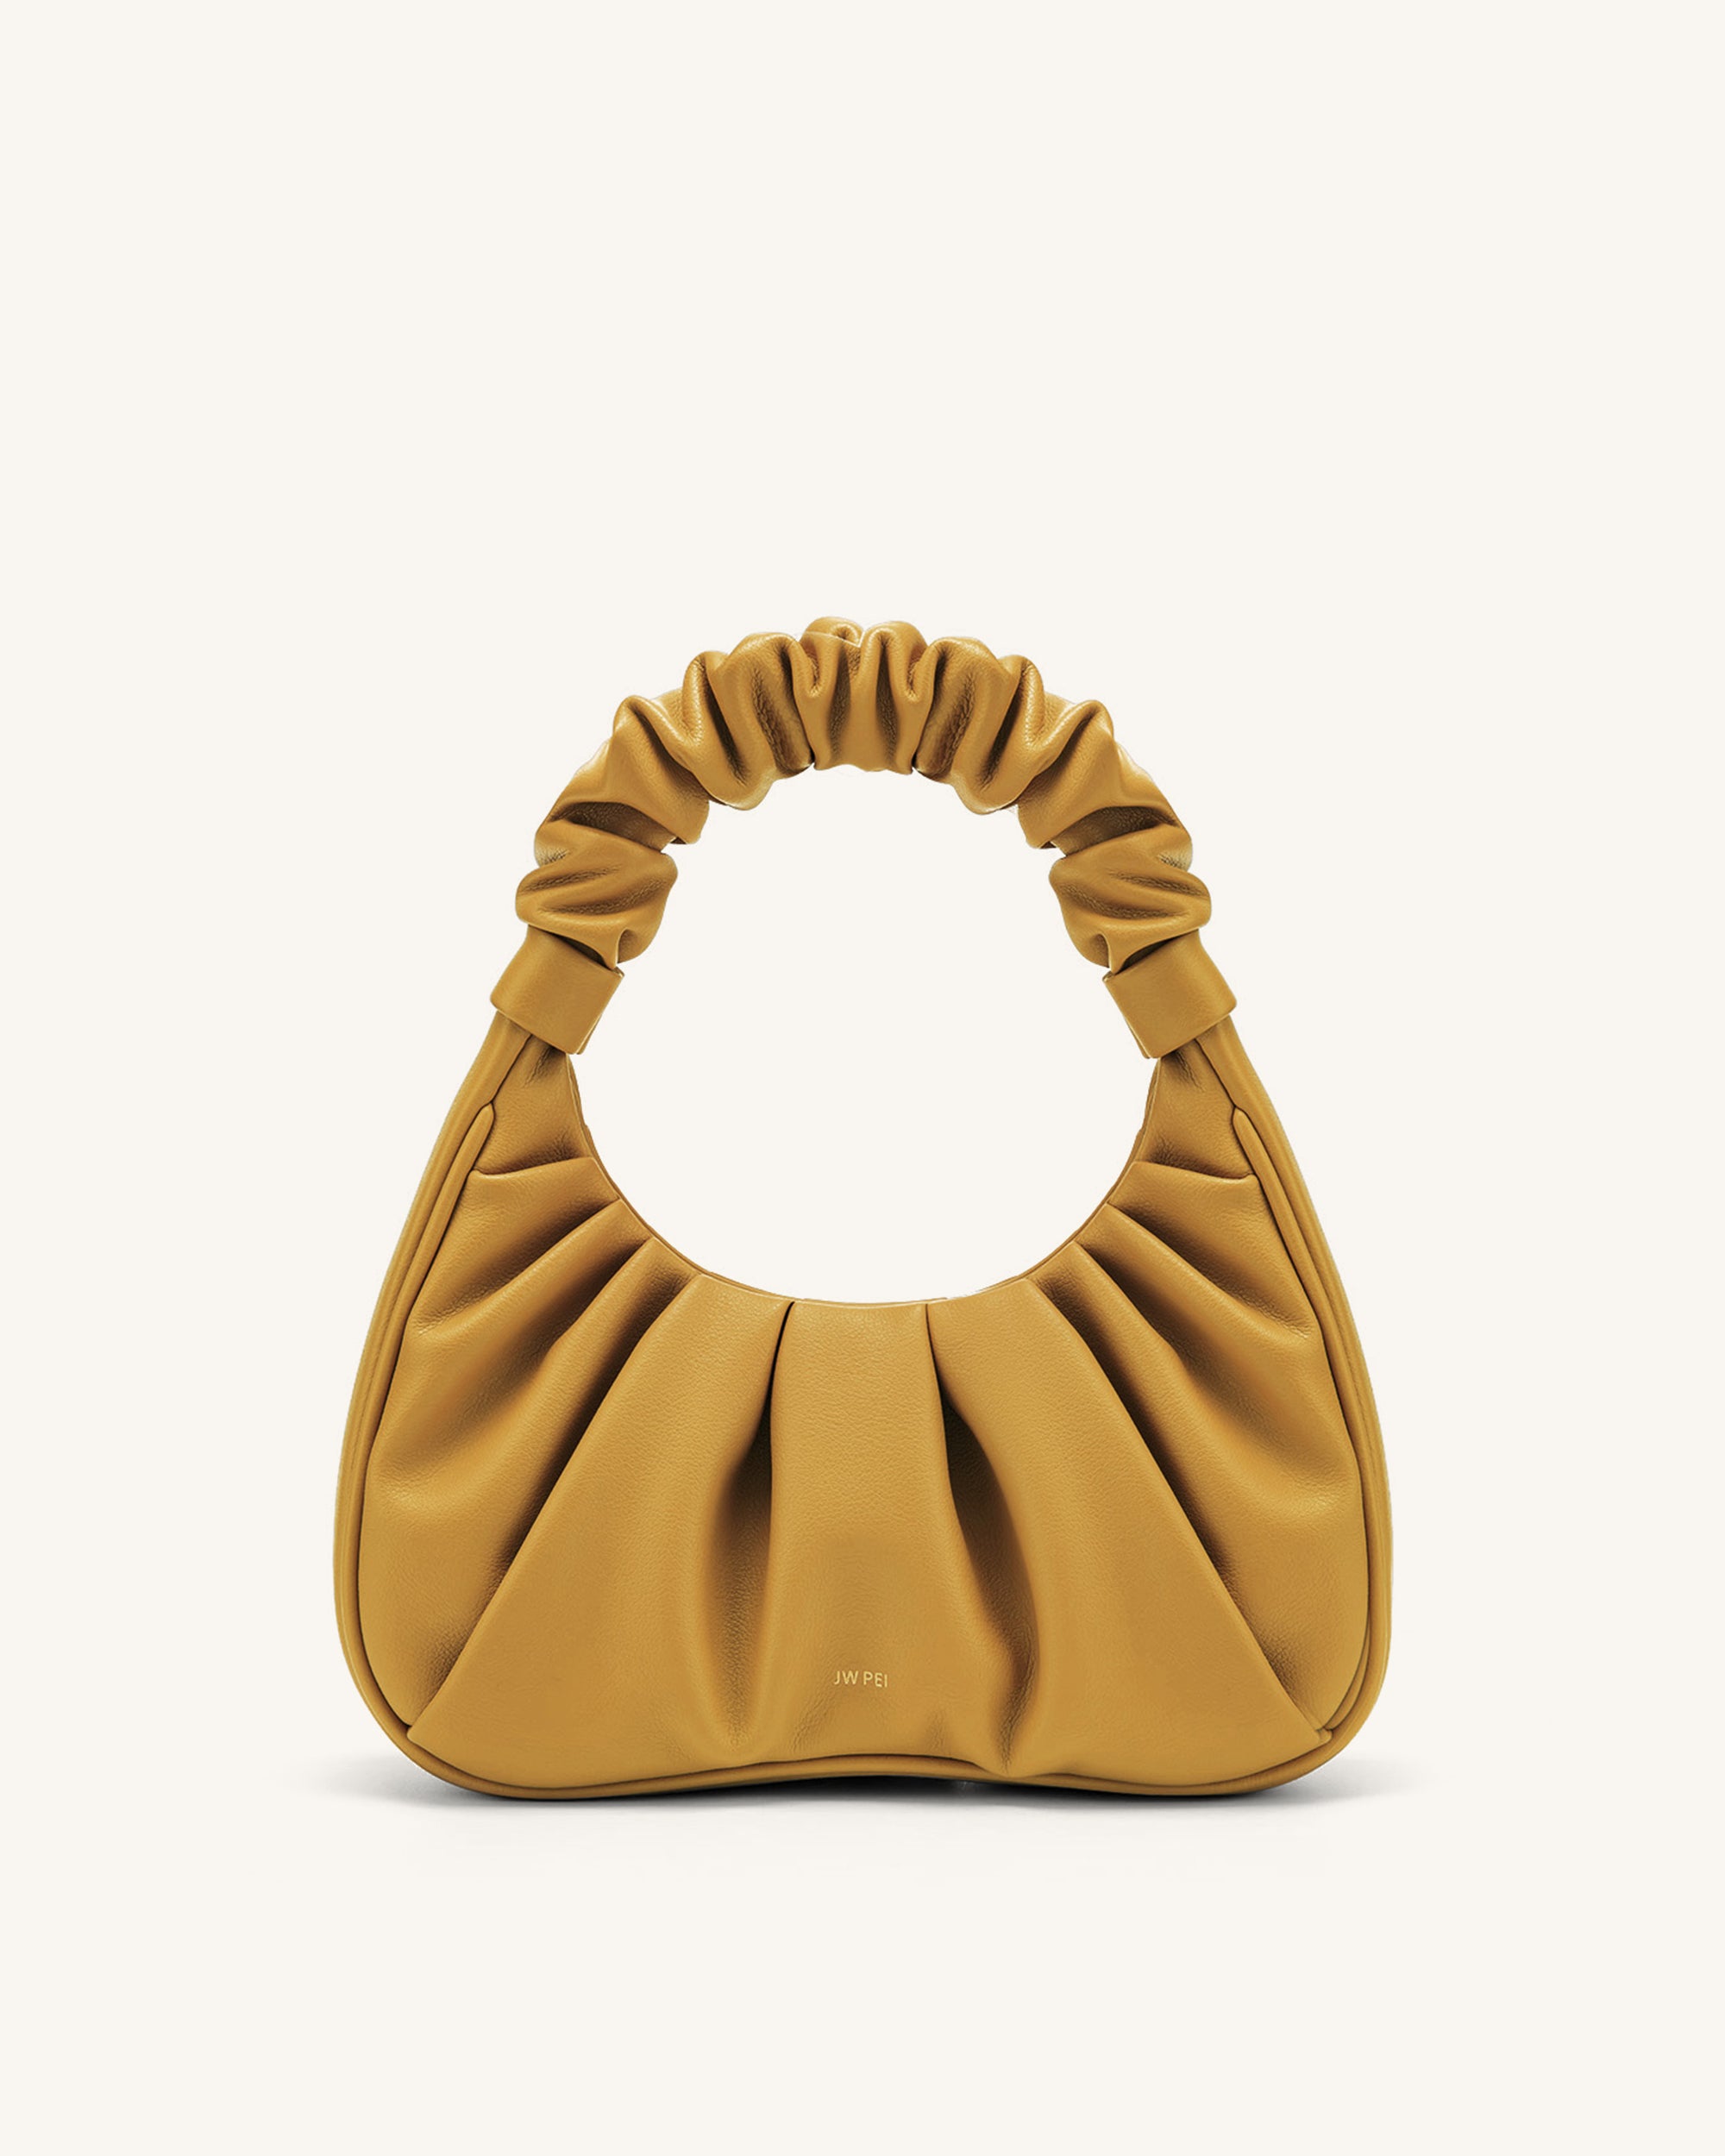 The JW Pei Gabbi Bag Is a Celeb-Approved Staple That's Only $80